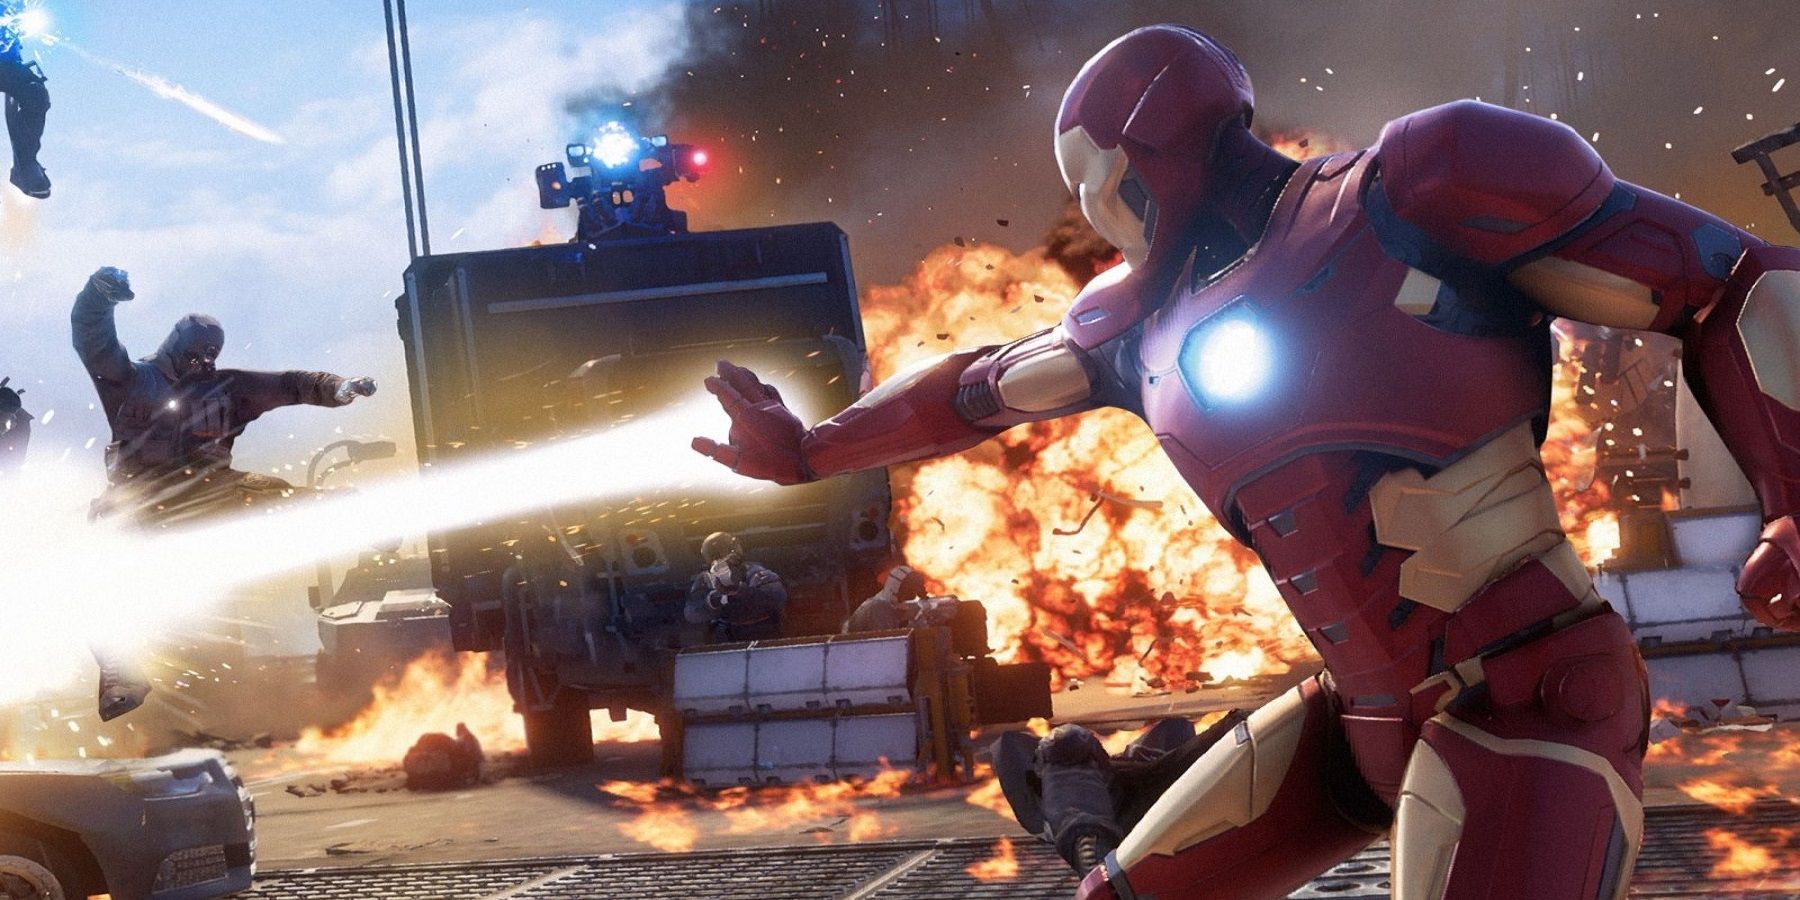 Iron Man's newest suit in Marvel's Avengers comes from the 2019 War of the Realms arc.